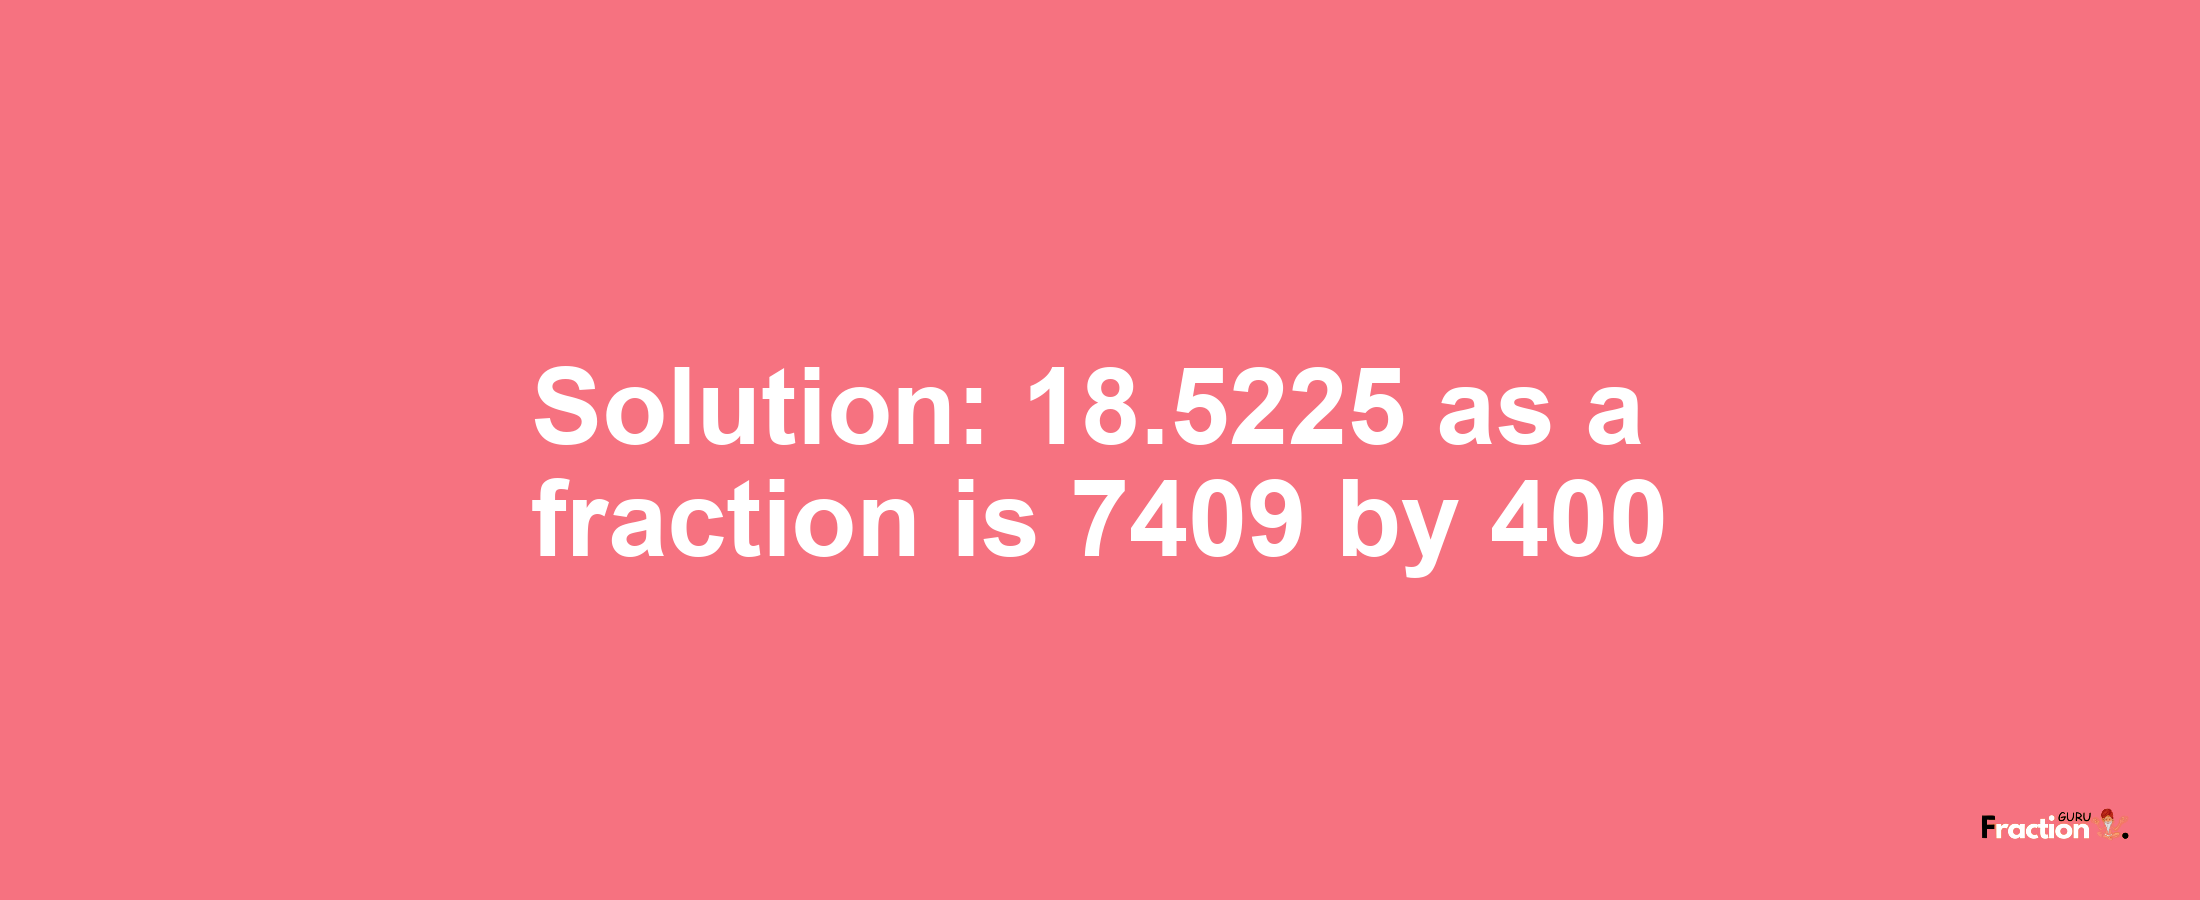 Solution:18.5225 as a fraction is 7409/400